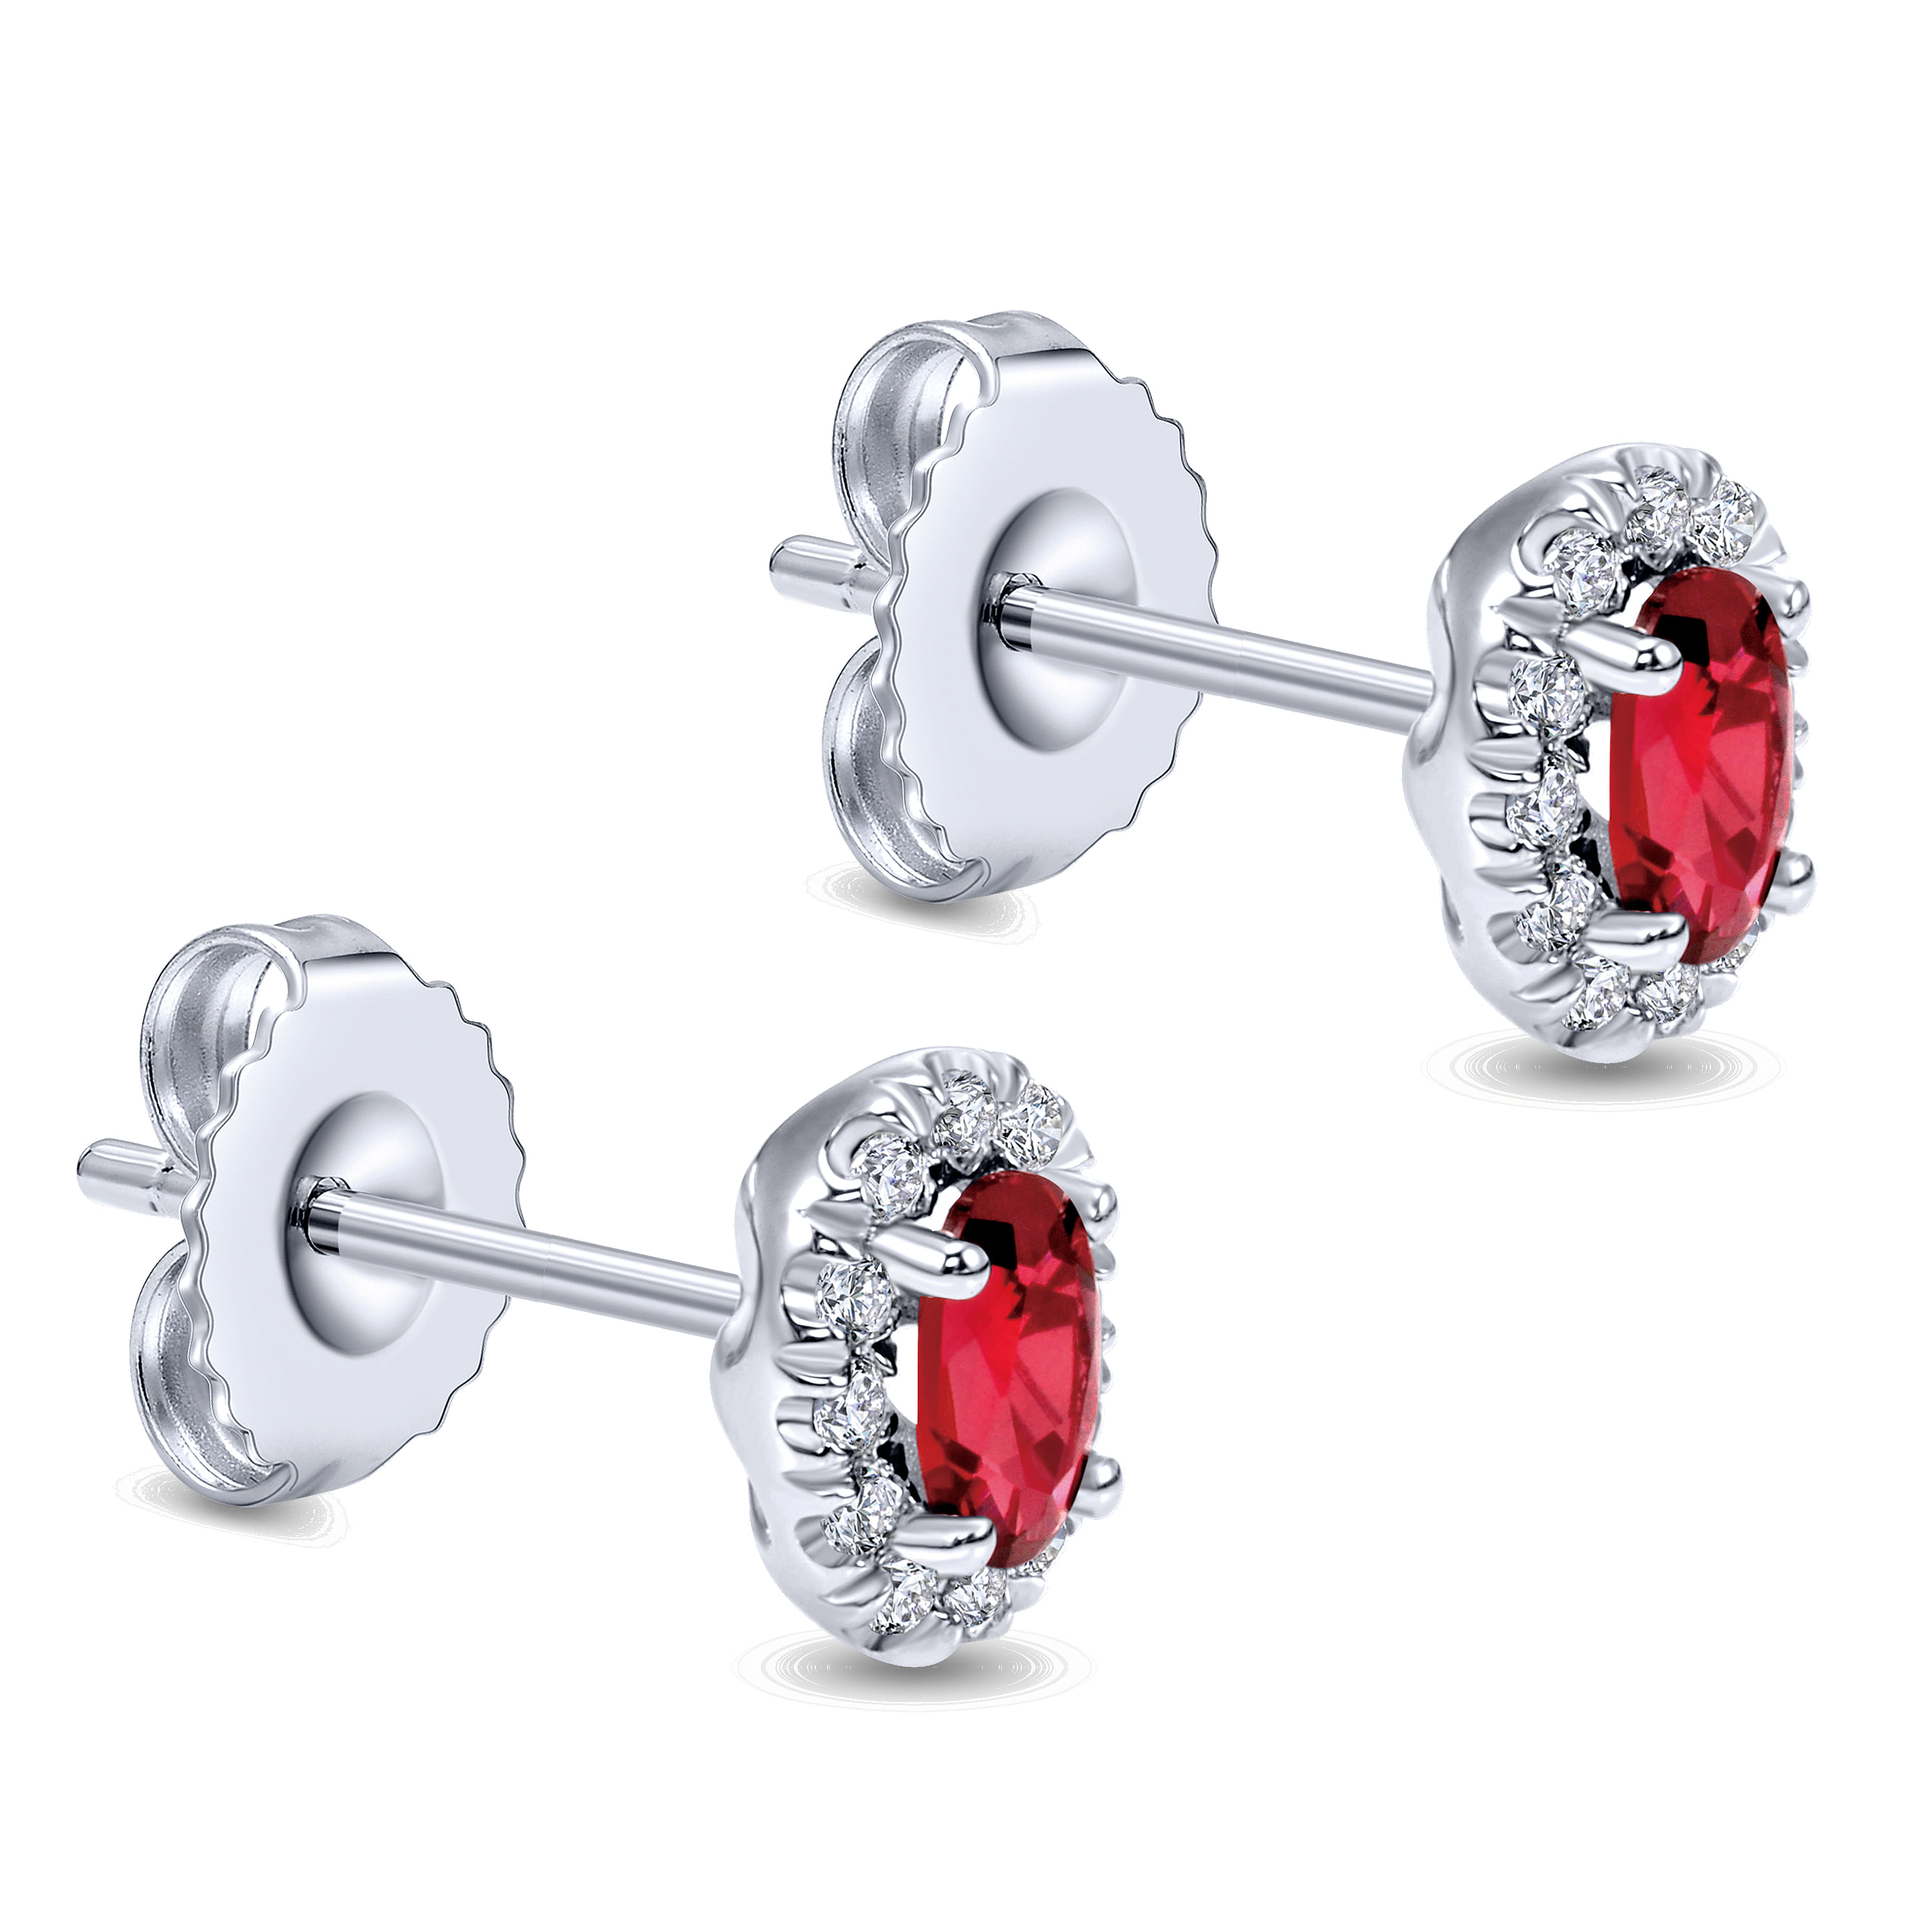 14K White Gold Oval Ruby and Diamond Halo Stud Earrings